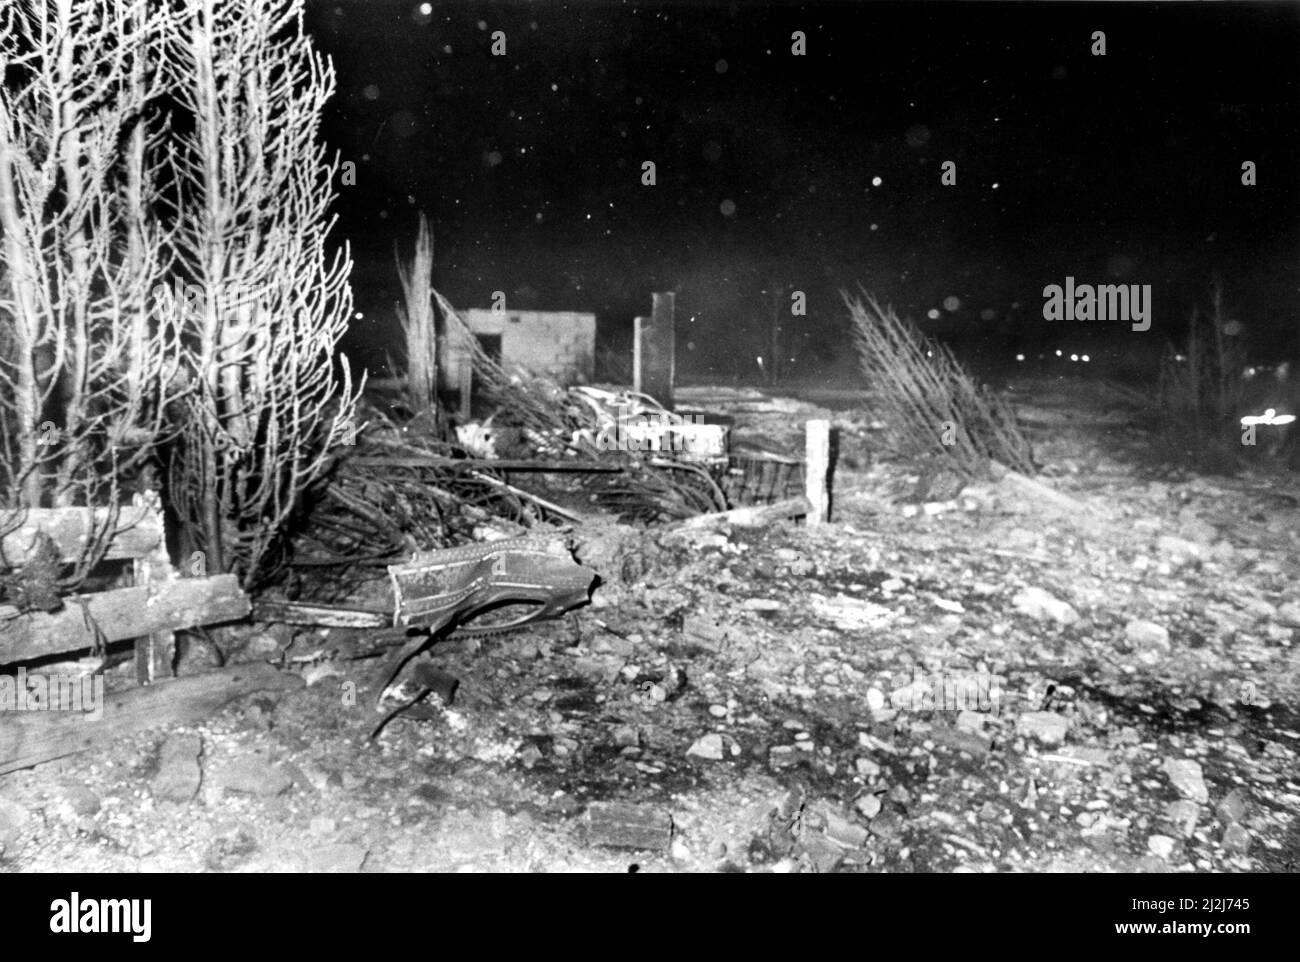 The Lockerbie Air Disaster which occurred on 21st December, 1988. The aircraft involved was the Pam Am Boeing 747-121, Clipper Maid of the Seas.  A scene of the devastation in and around Lockerbie.    22/12/1988 Stock Photo